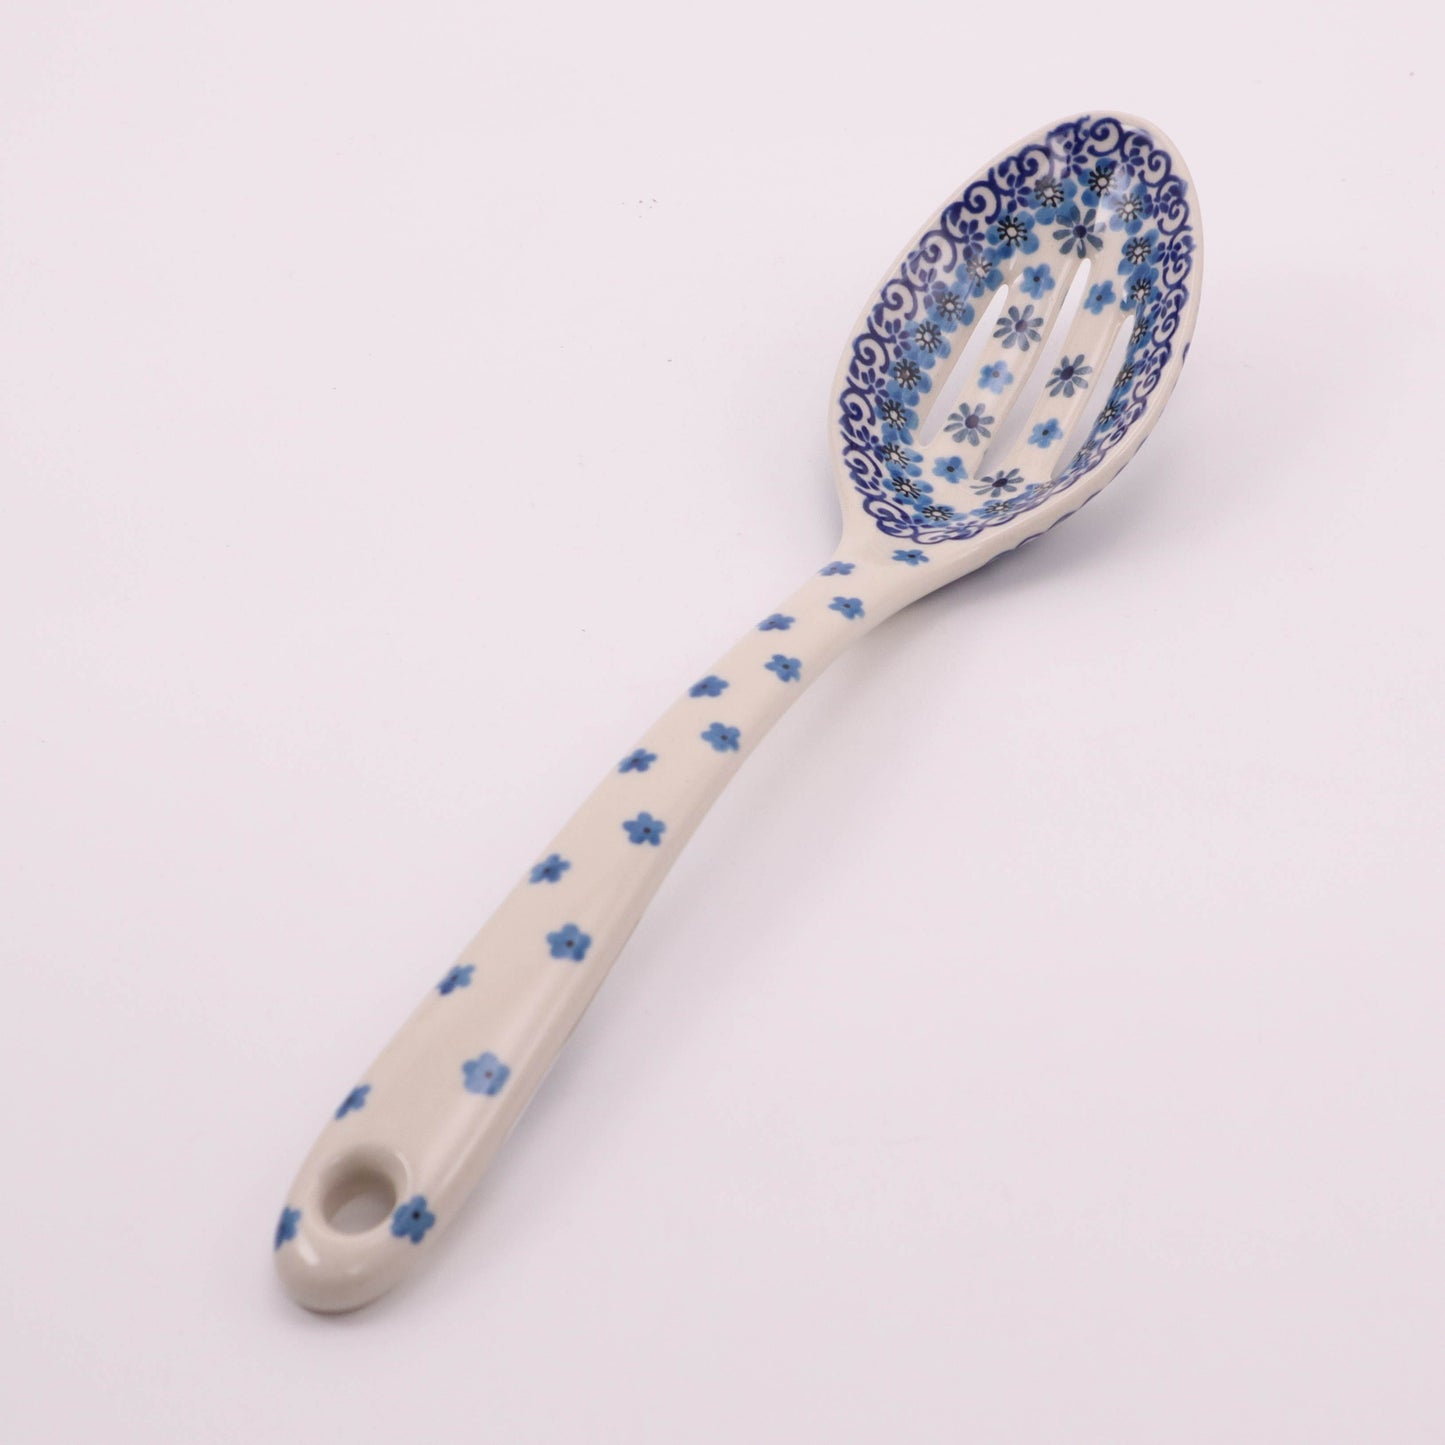 12" Slotted Spoon. Pattern: Country Charm